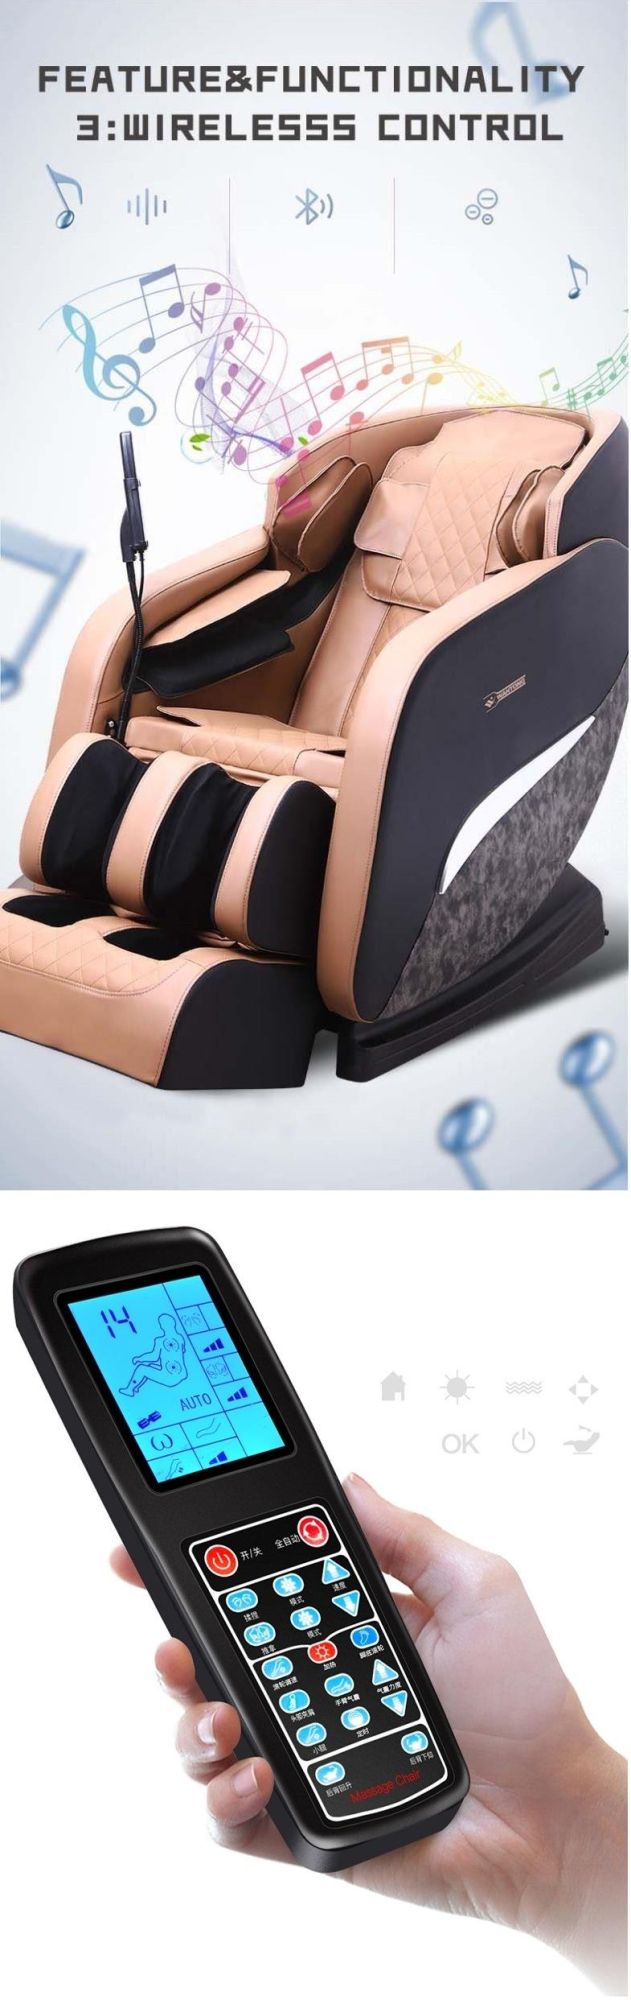 Wantong Display LCD Remote Control Luxury 4D Foot SPA Factory Price Kneading Shiatsu Blue-Tooth Function Massage Chair